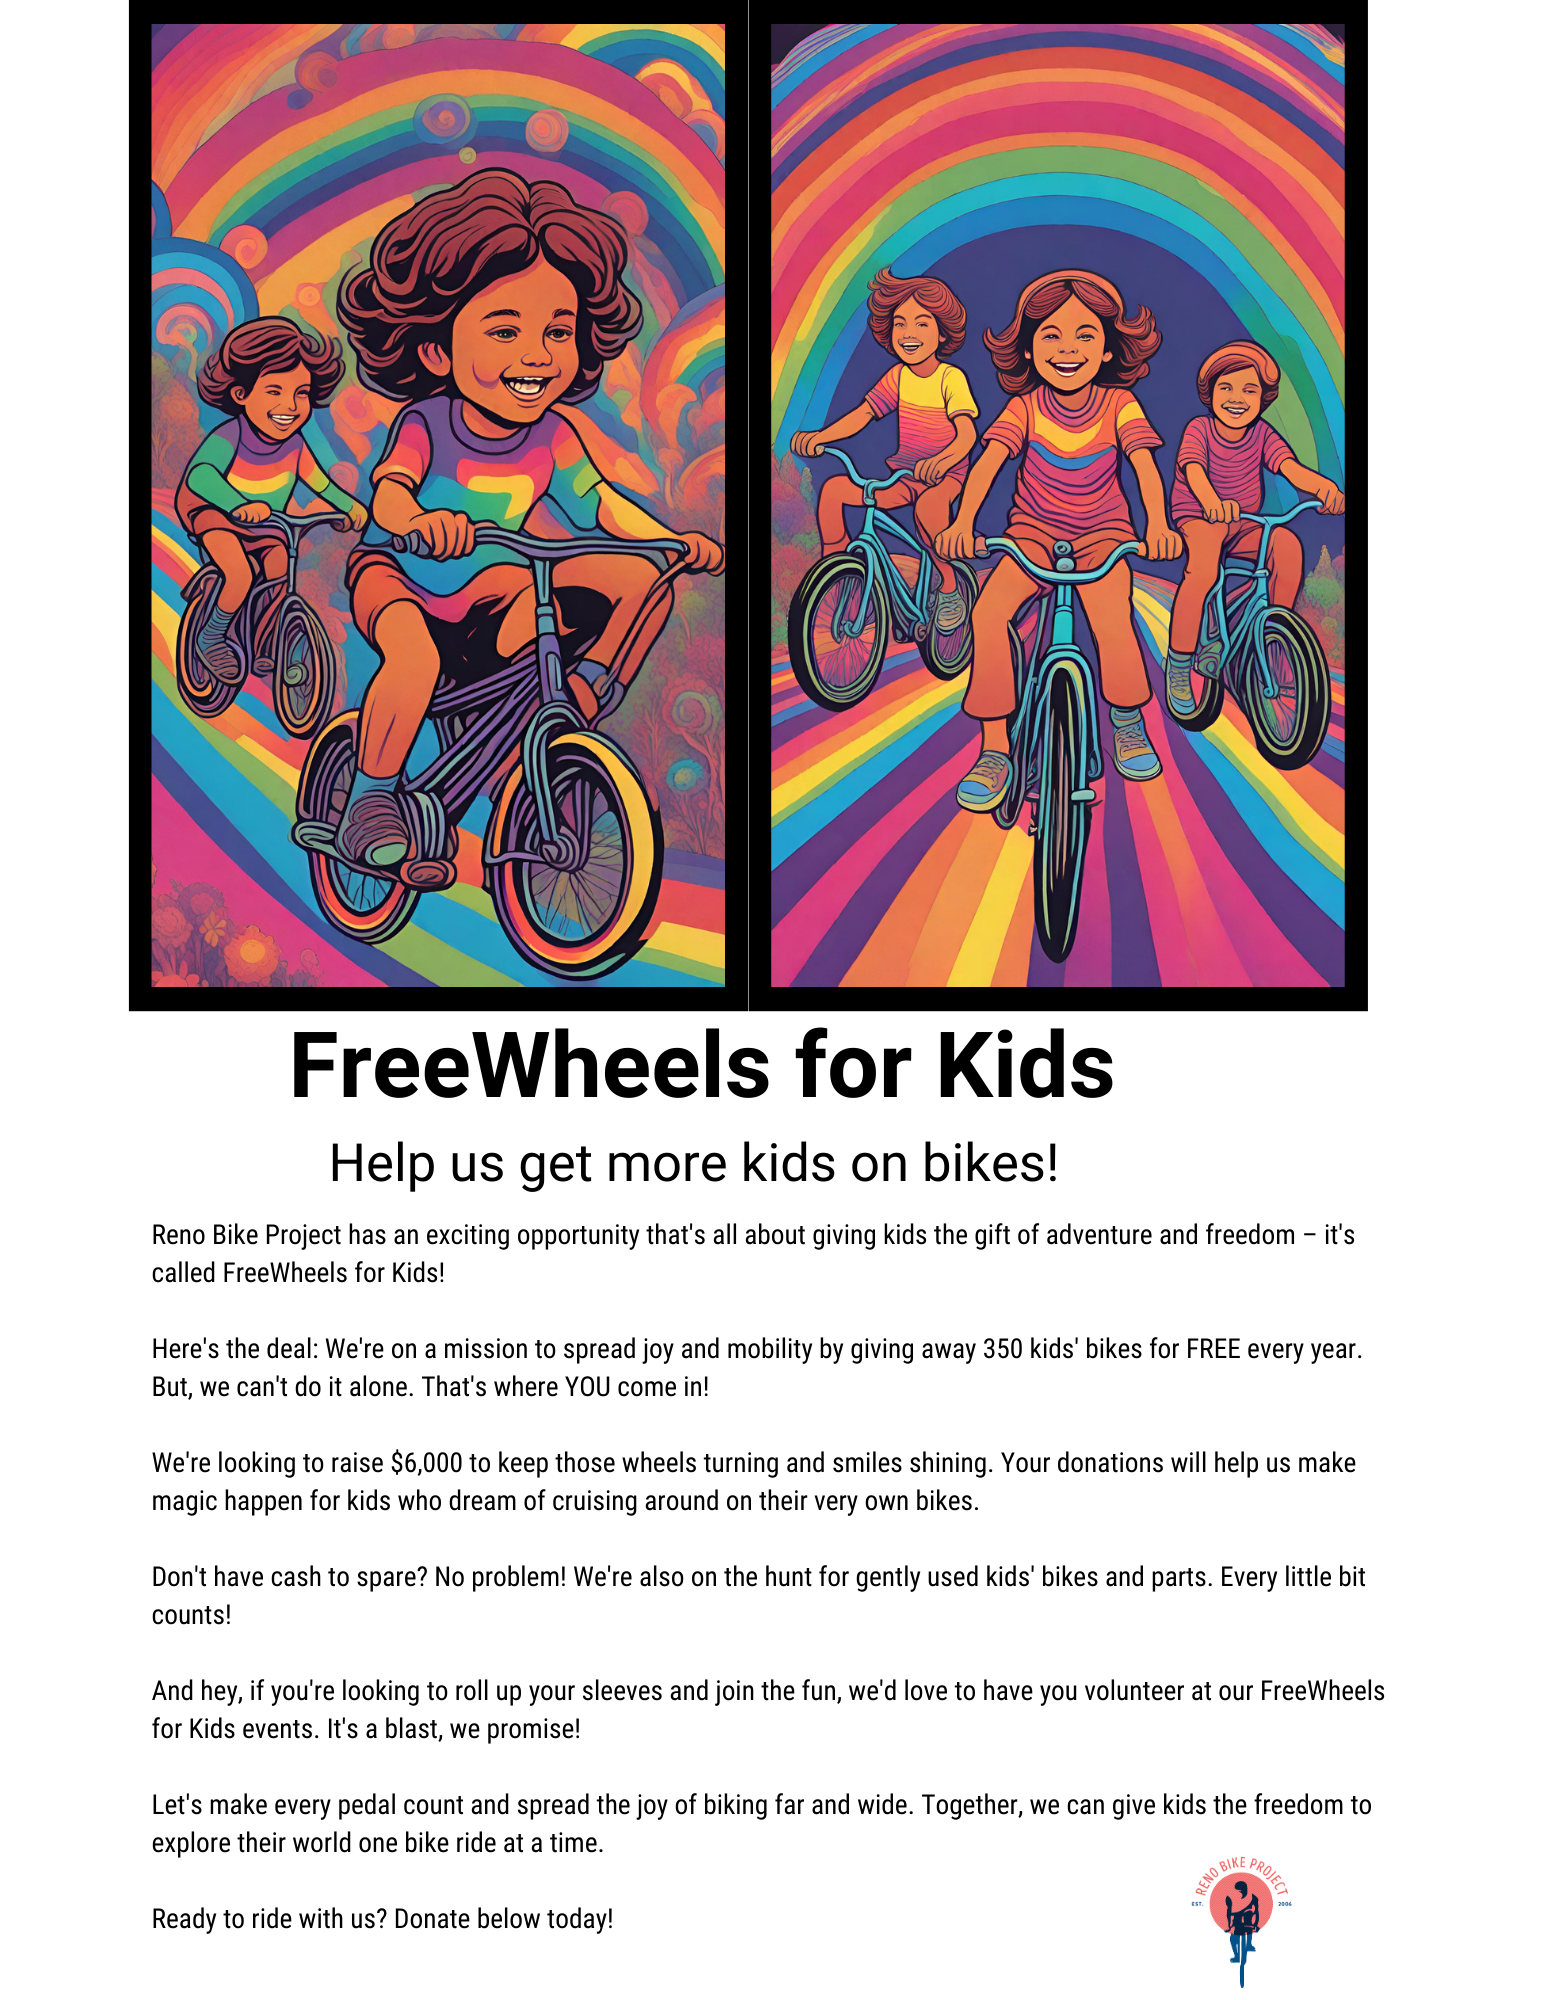 Reno Bike Project has an exciting opportunity that's all about giving kids the gift of adventure and freedom – it's called FreeWheels for Kids! Here's the deal We're on a mission to spread joy and